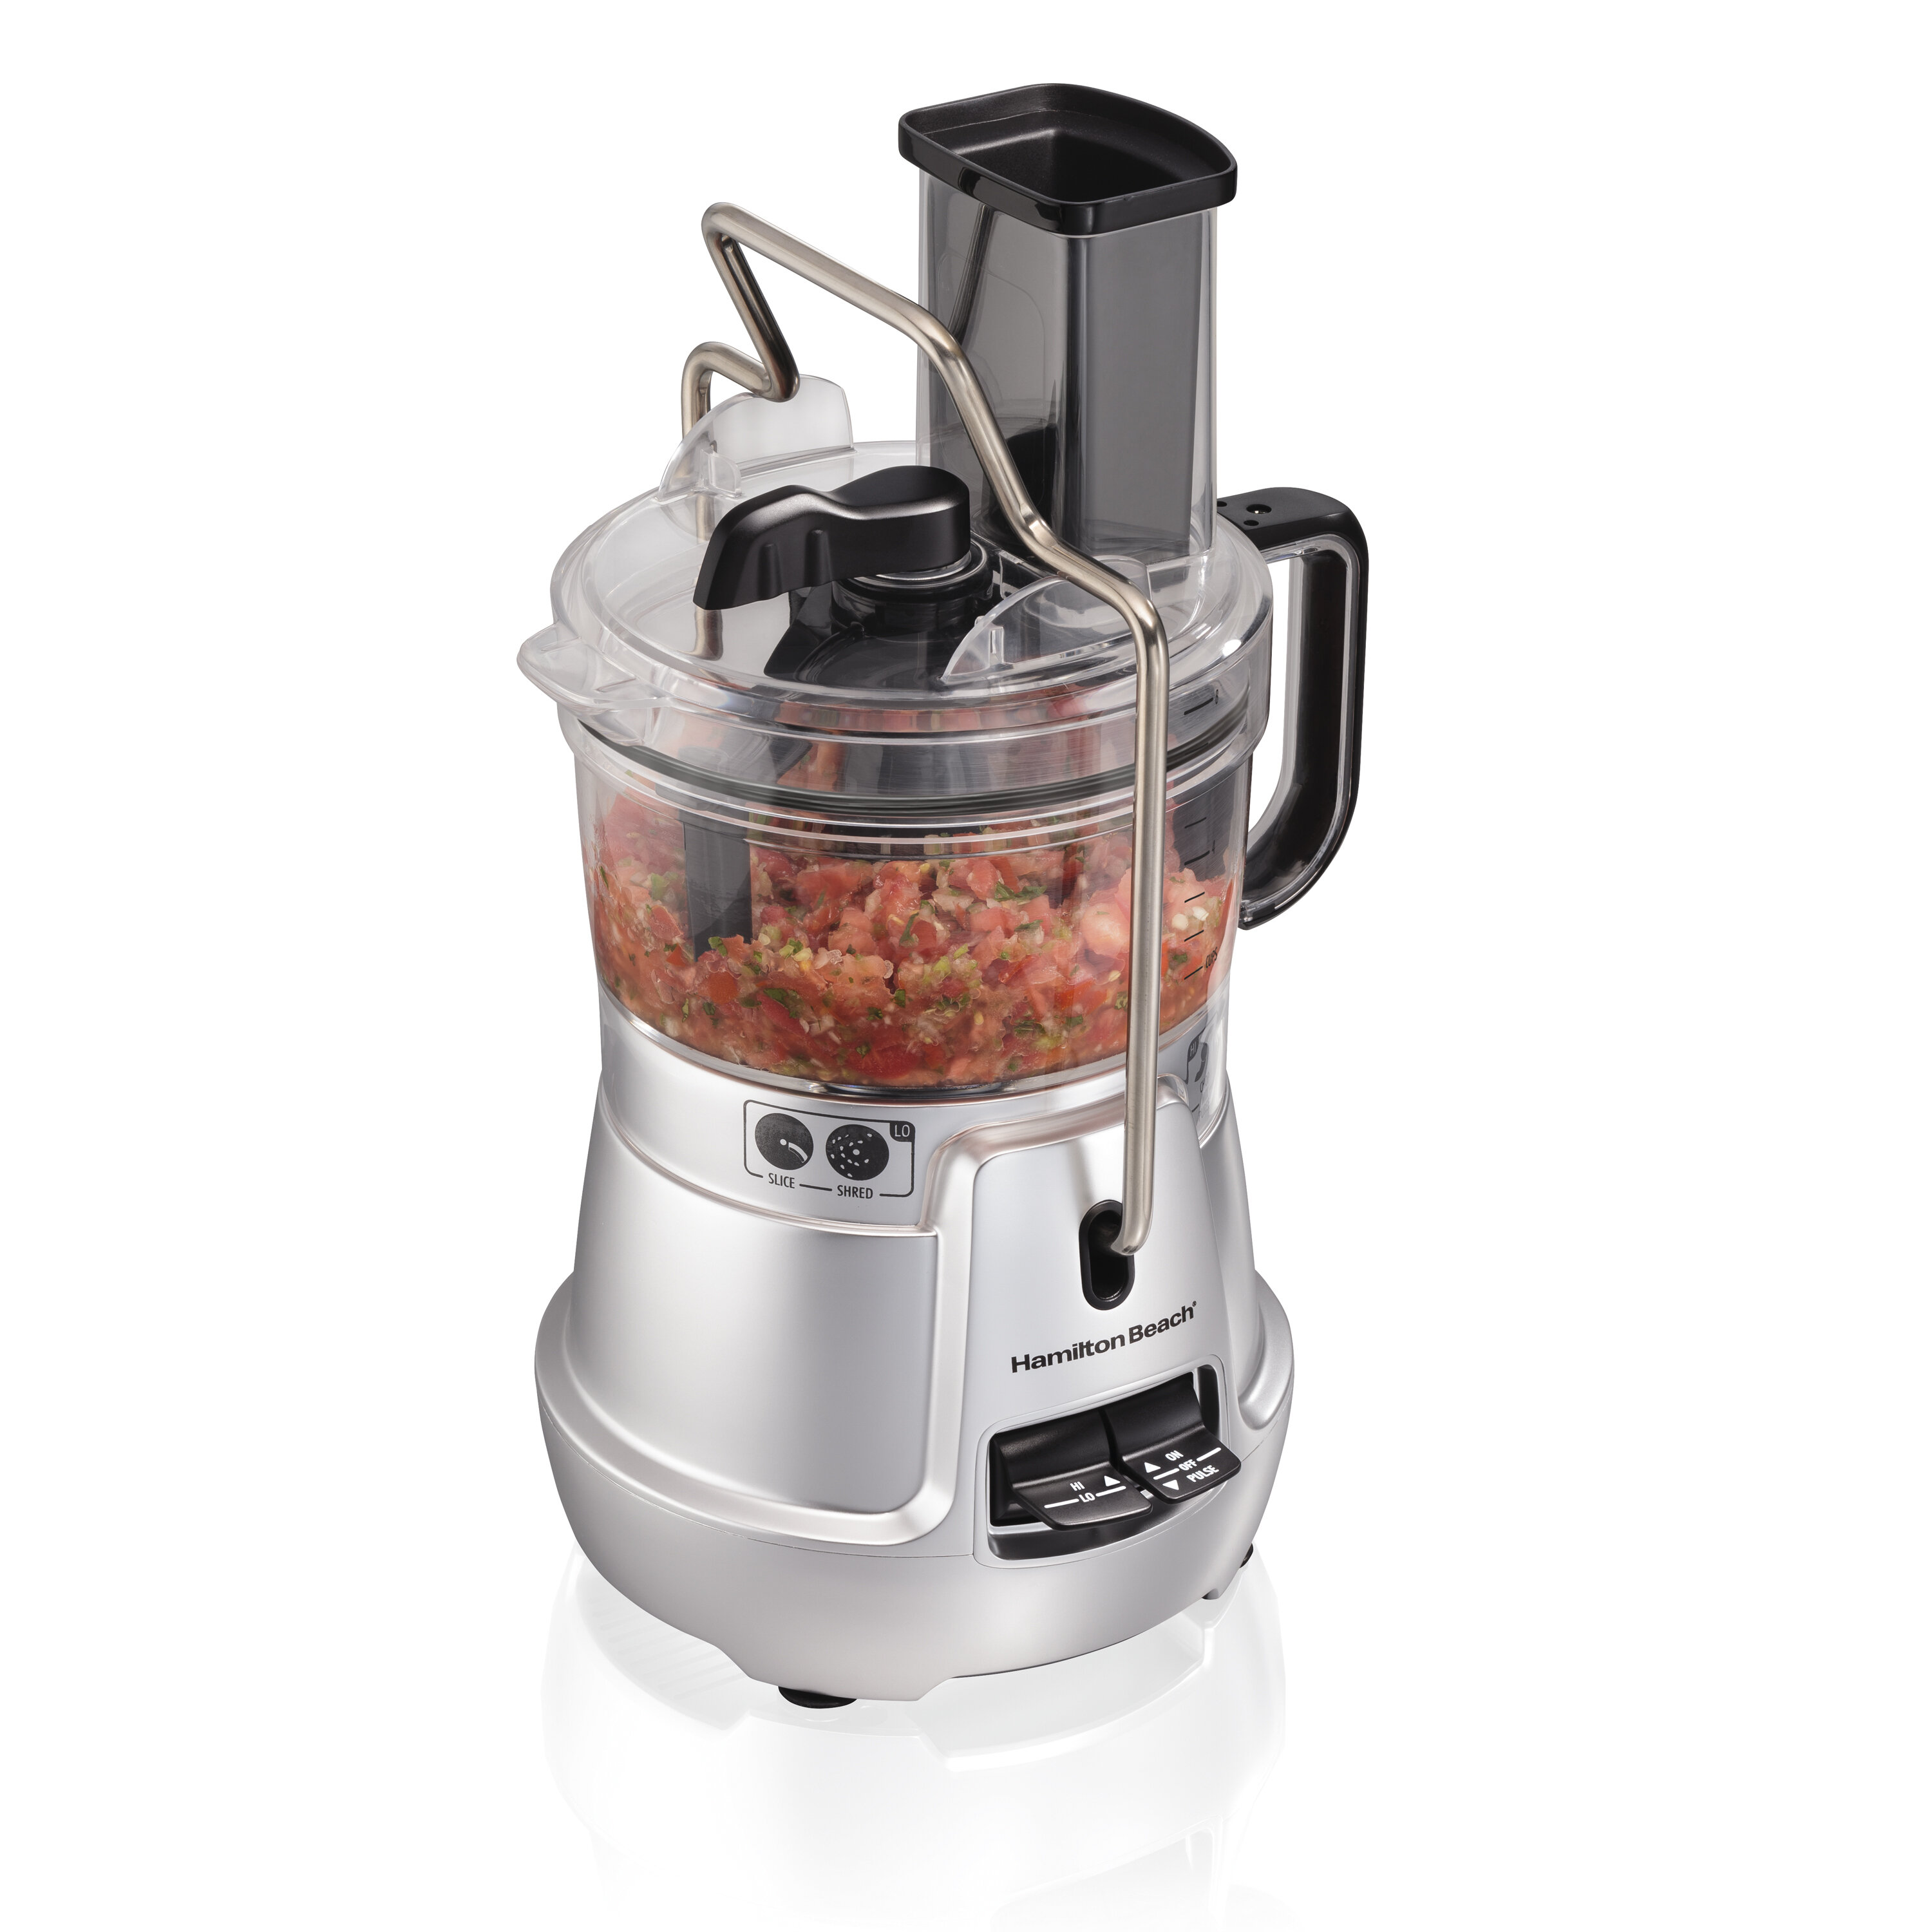 Hamilton Beach 4-Cup 5-Speed Black Stack & Snap Compact Food